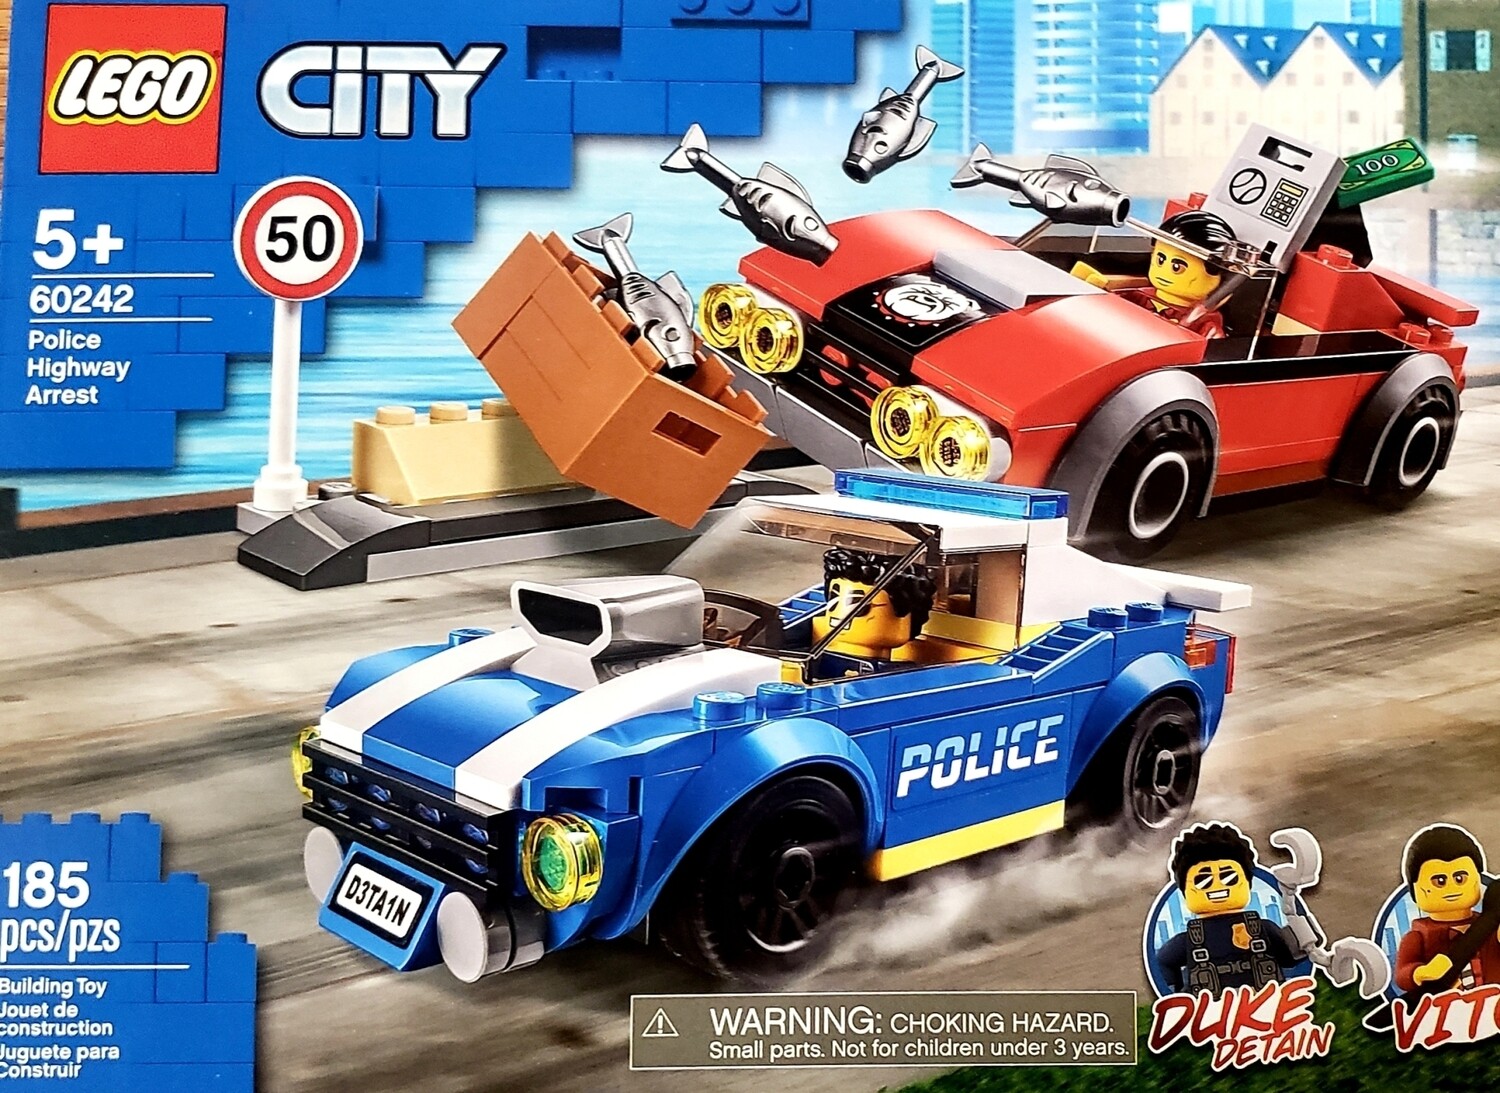 LEGO 60242 City Police Highway Arrest Building Toy Kit 185 Pieces 